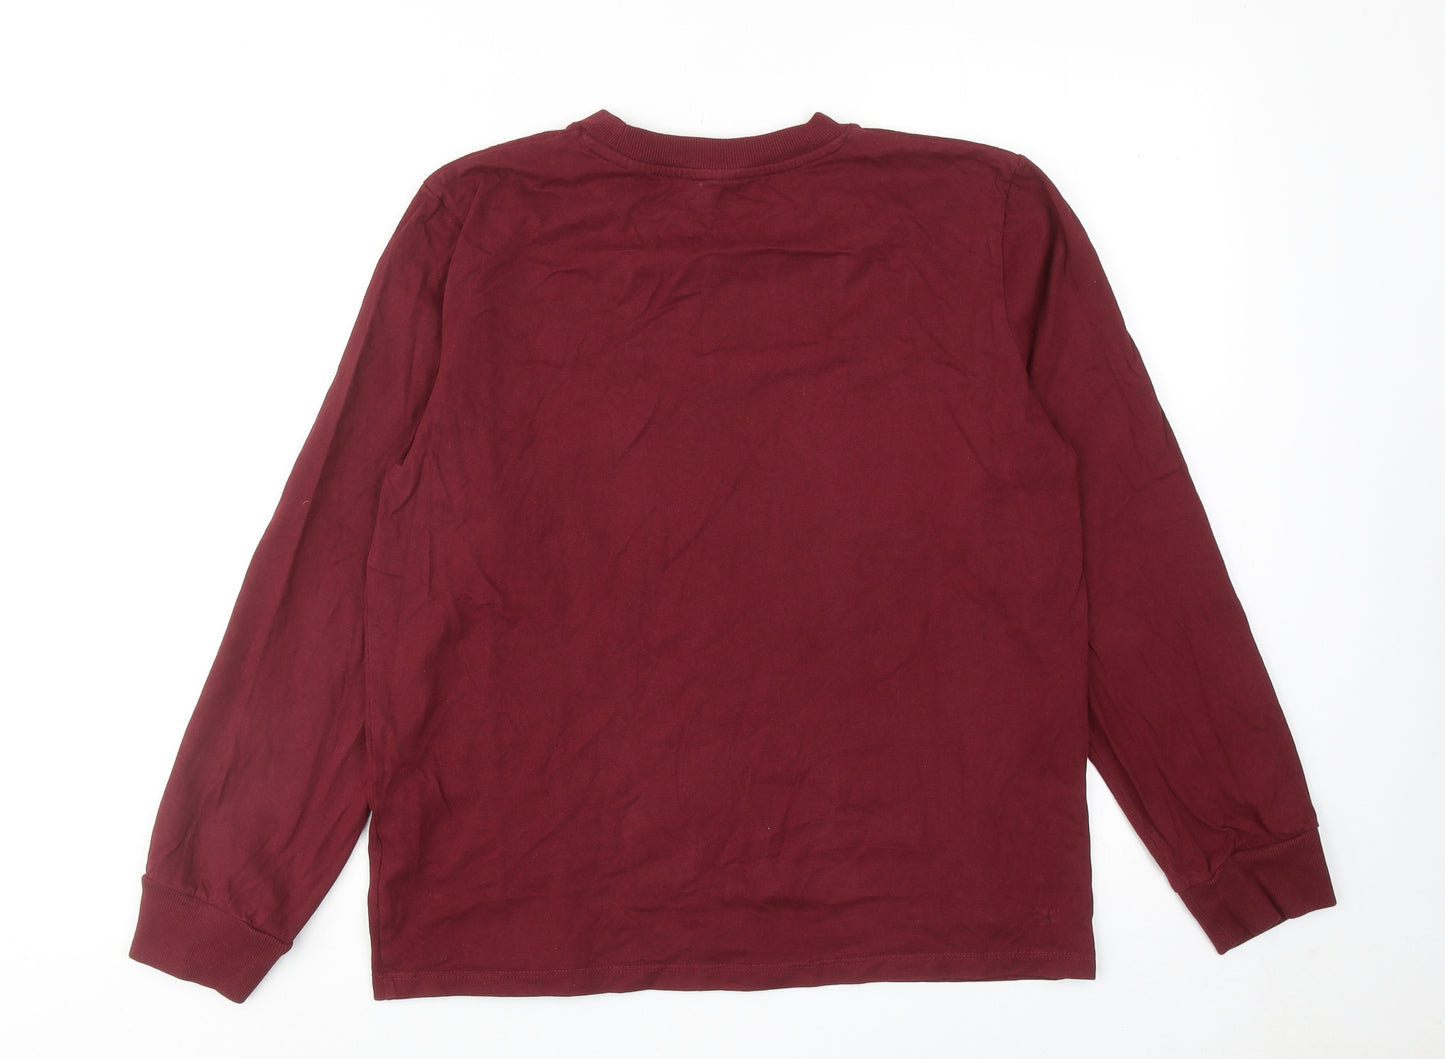 NEXT Boys Red Cotton Basic T-Shirt Size 14 Years Round Neck Pullover